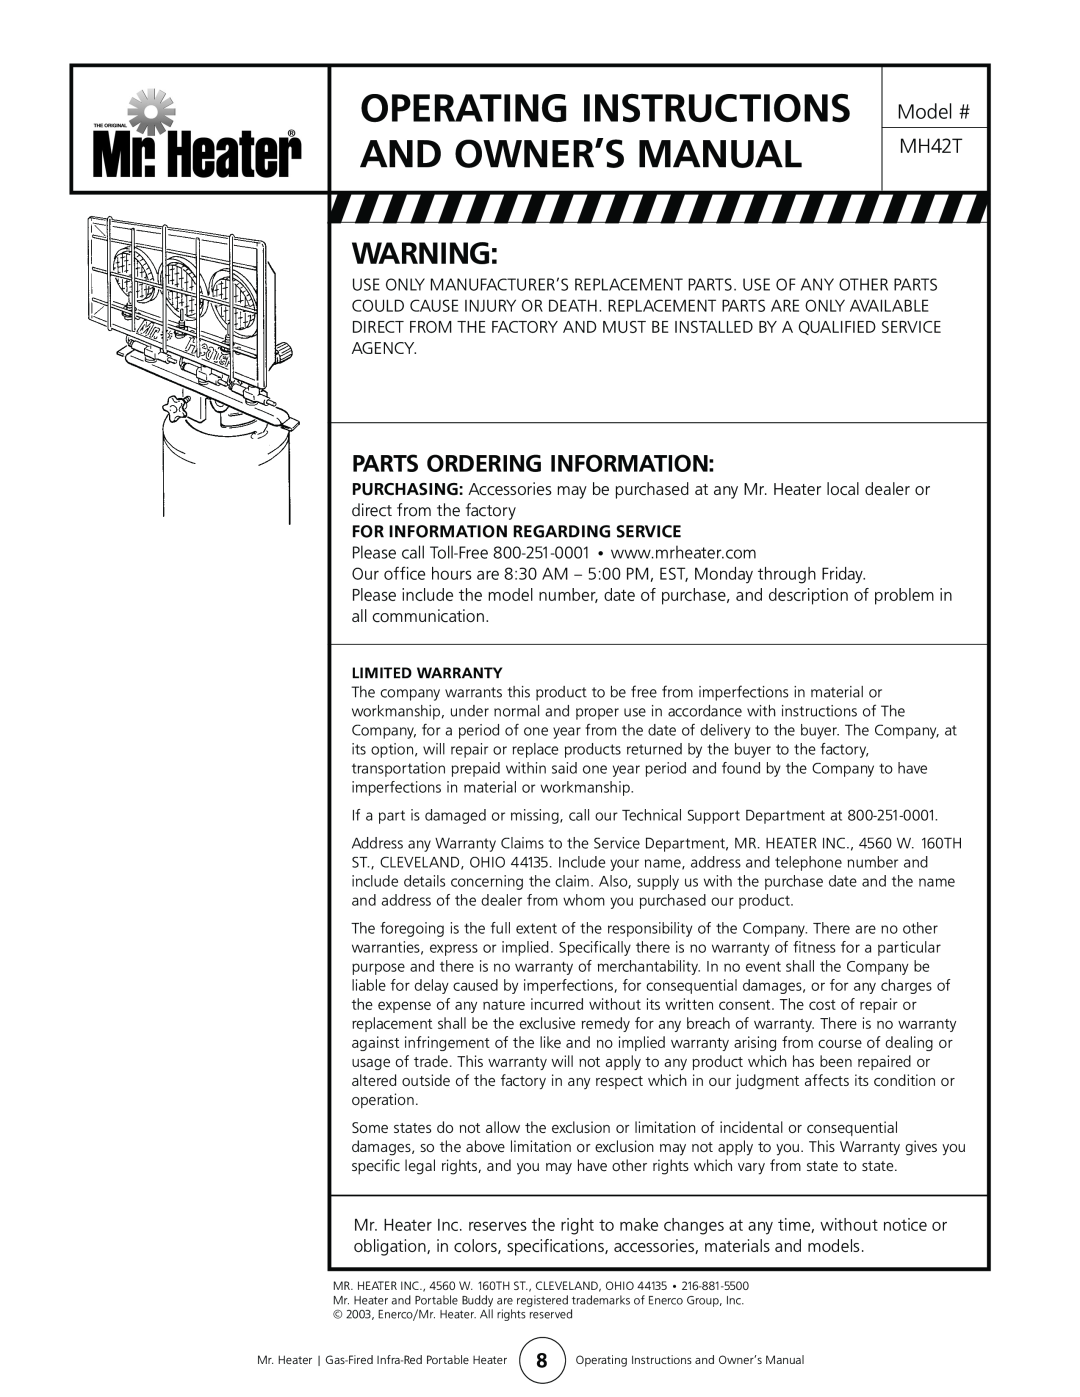 Enerco MH42T operating instructions Parts Ordering Information, For Information Regarding Service 